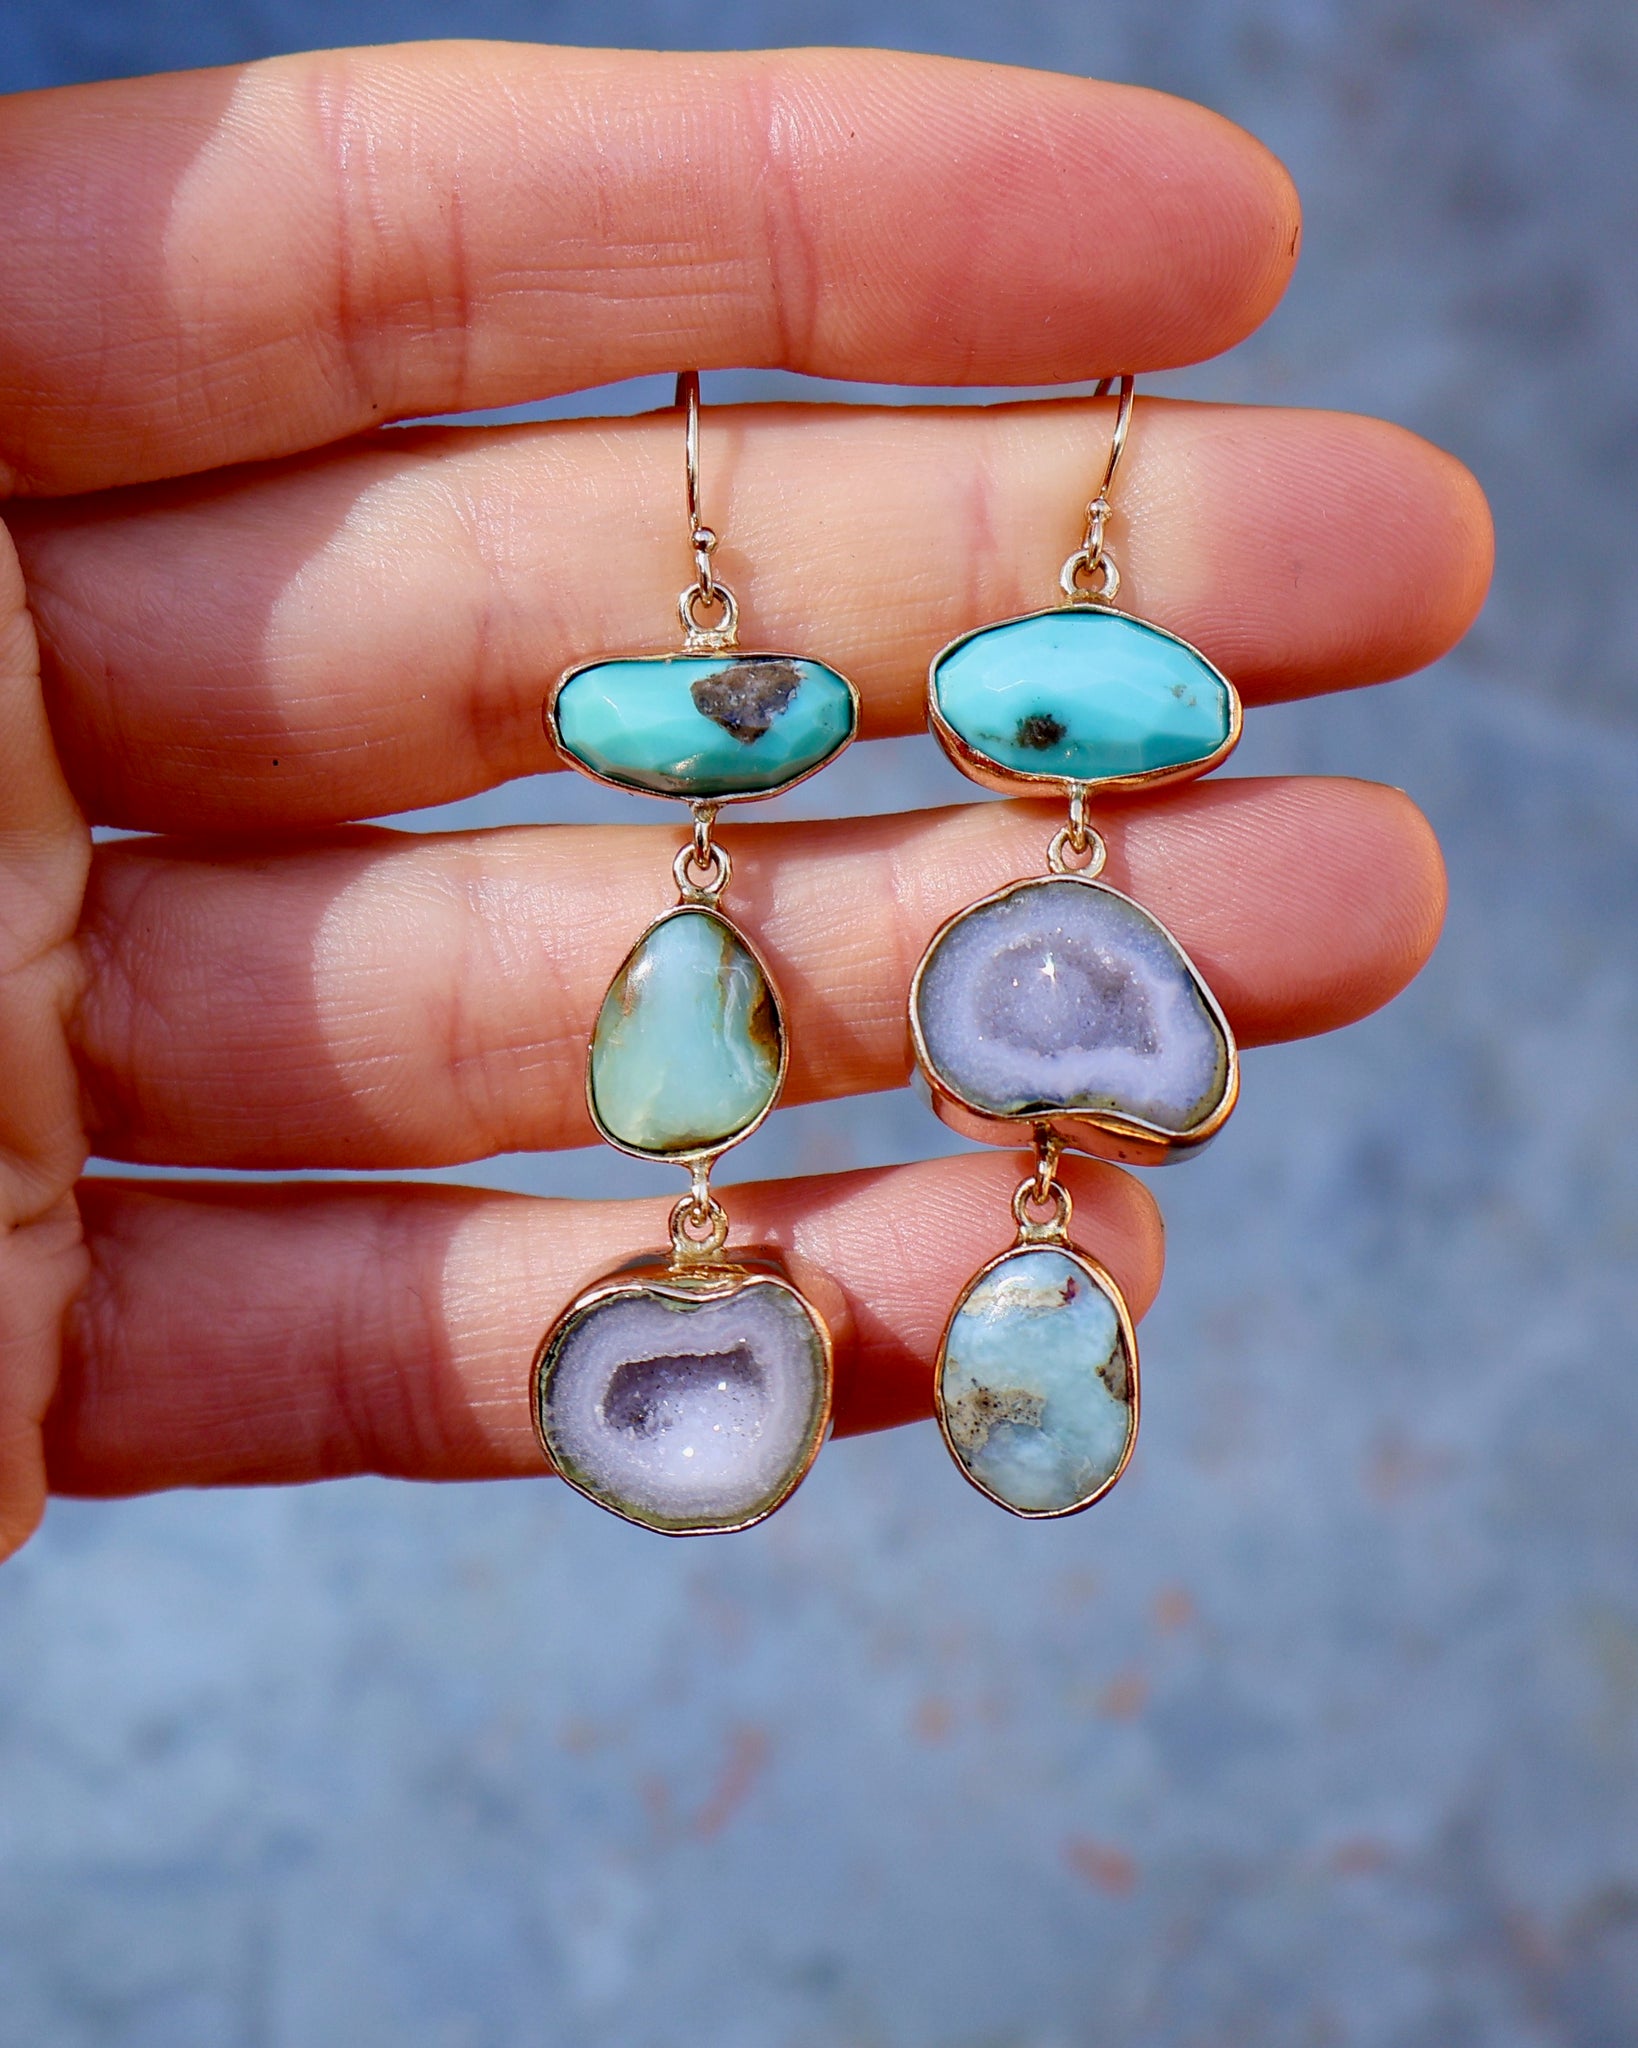 Winter Thaw Triple Stone Earrings White Turquoise,Opal & Geodes in Gold Tones